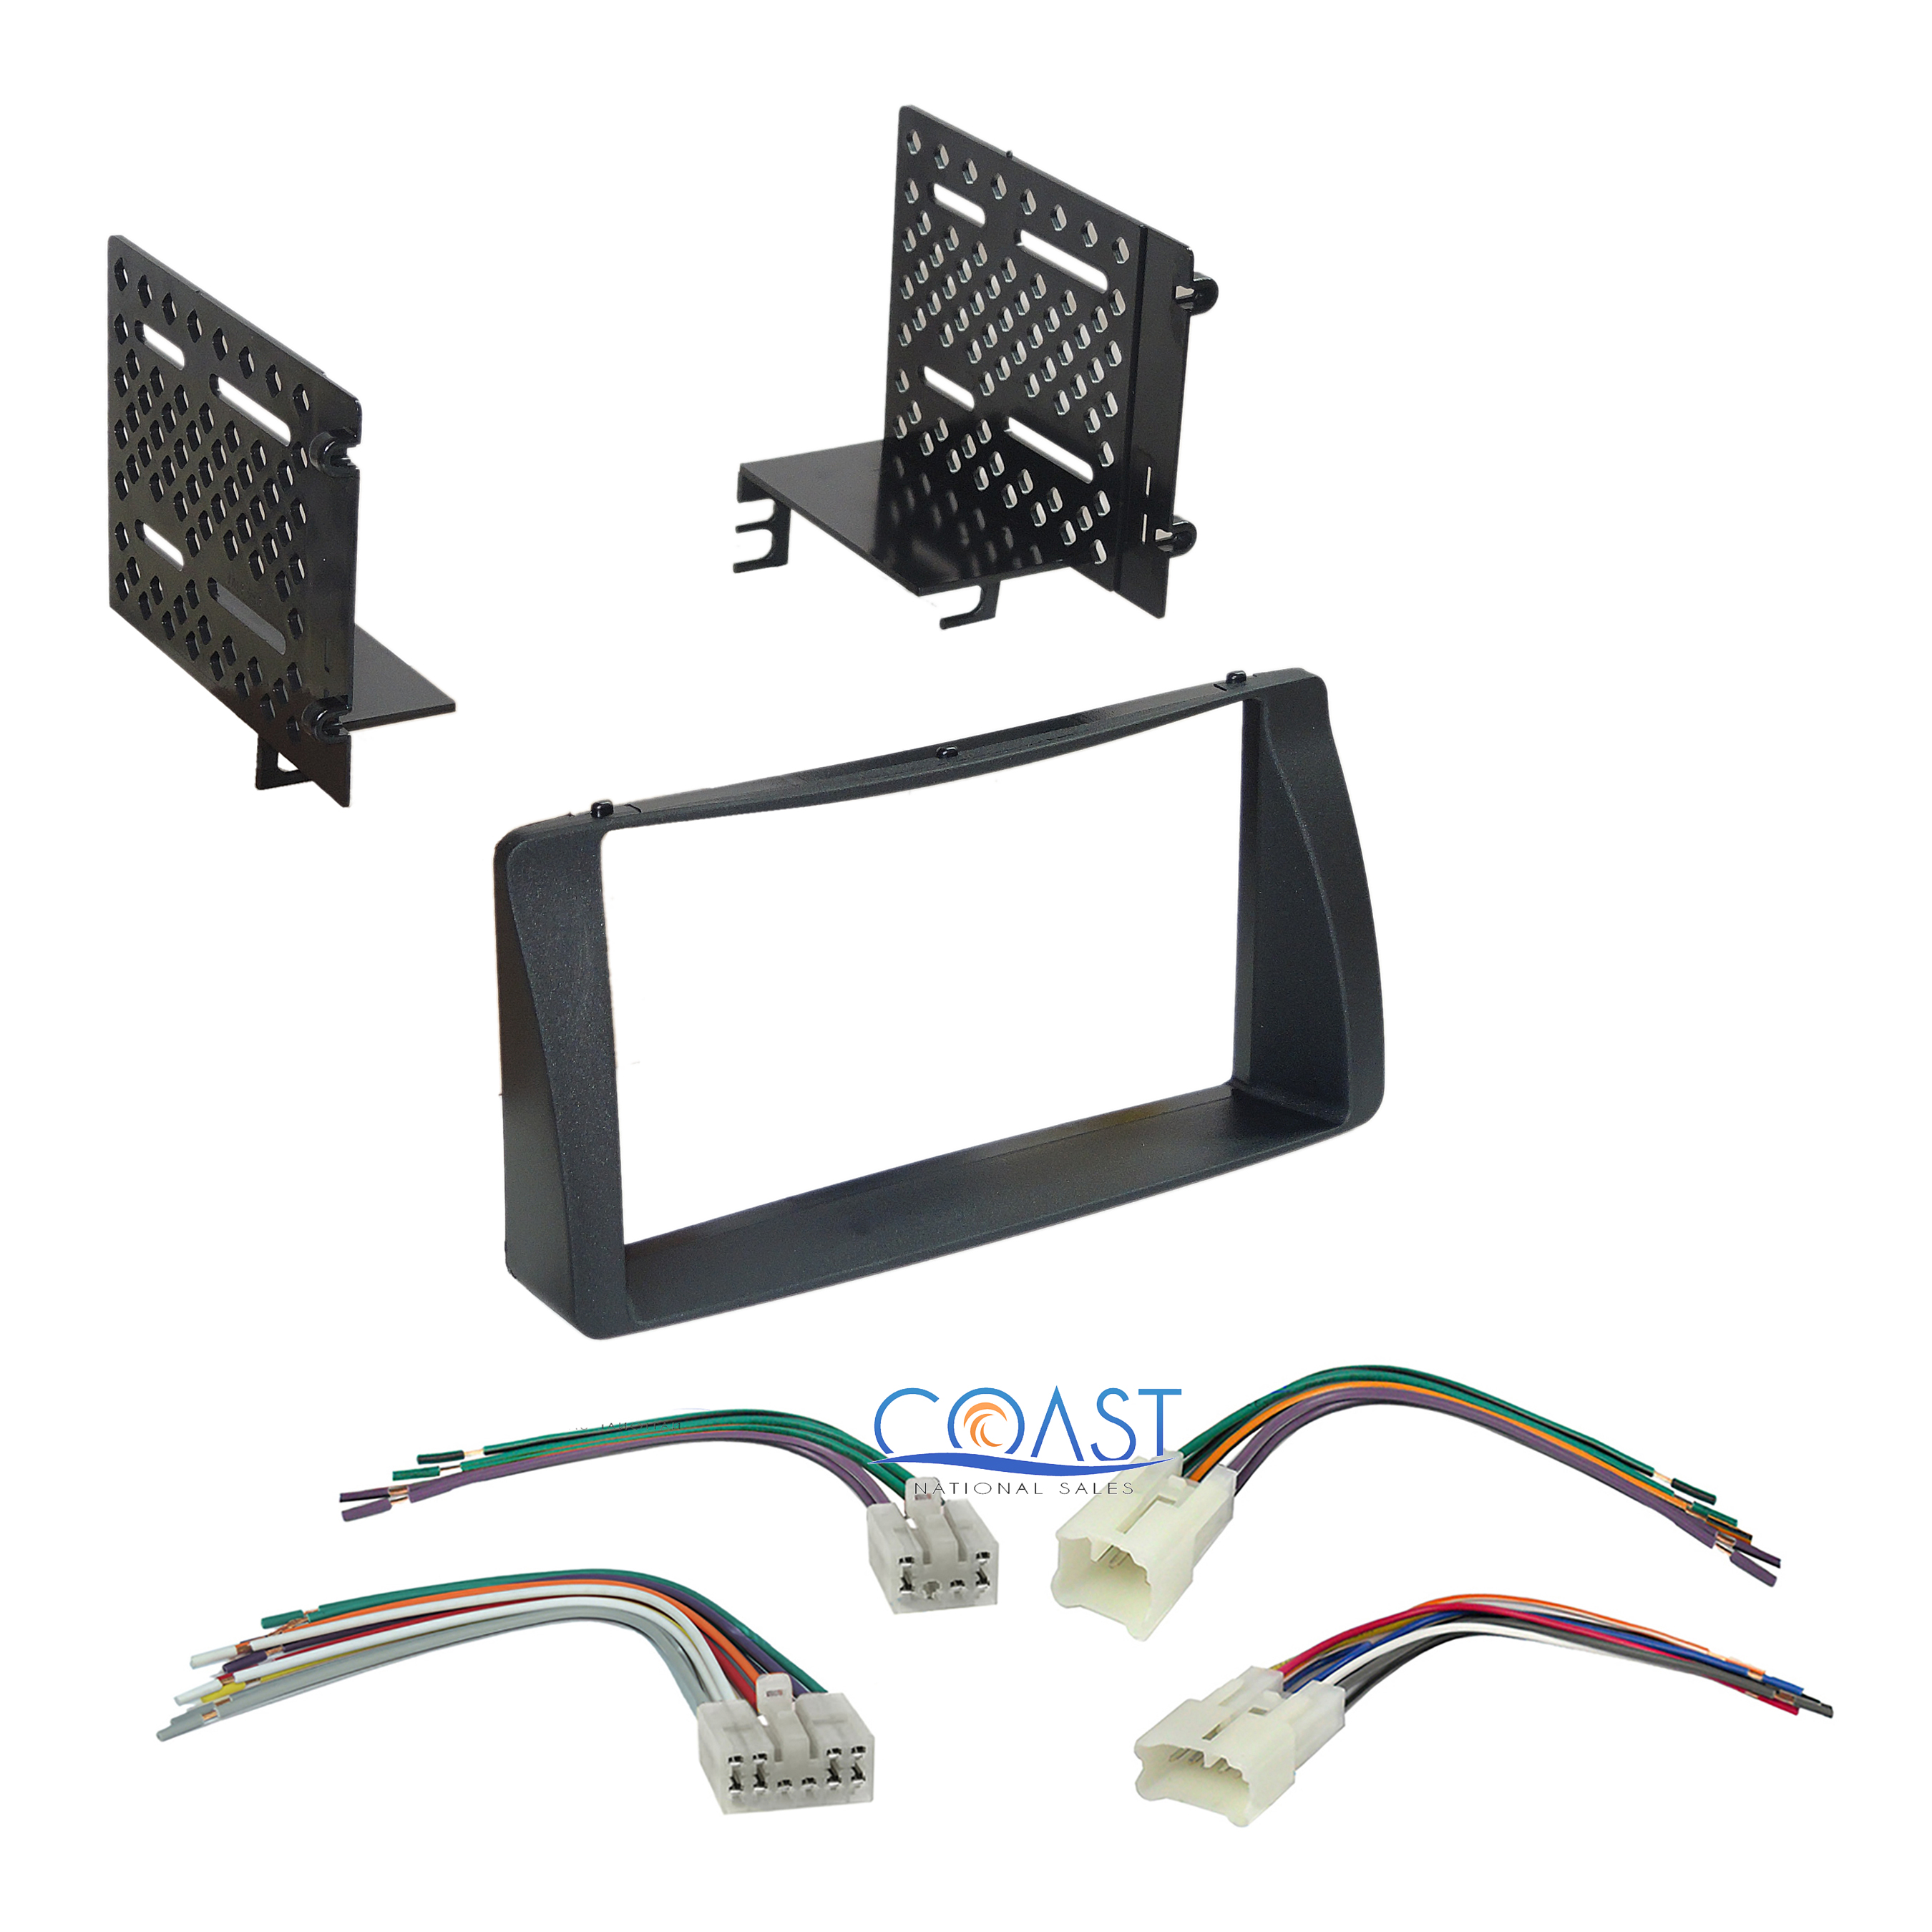 Car Radio Stereo Double DIN Dash Kit Harness Combo for ... scosche dodge wiring harness 